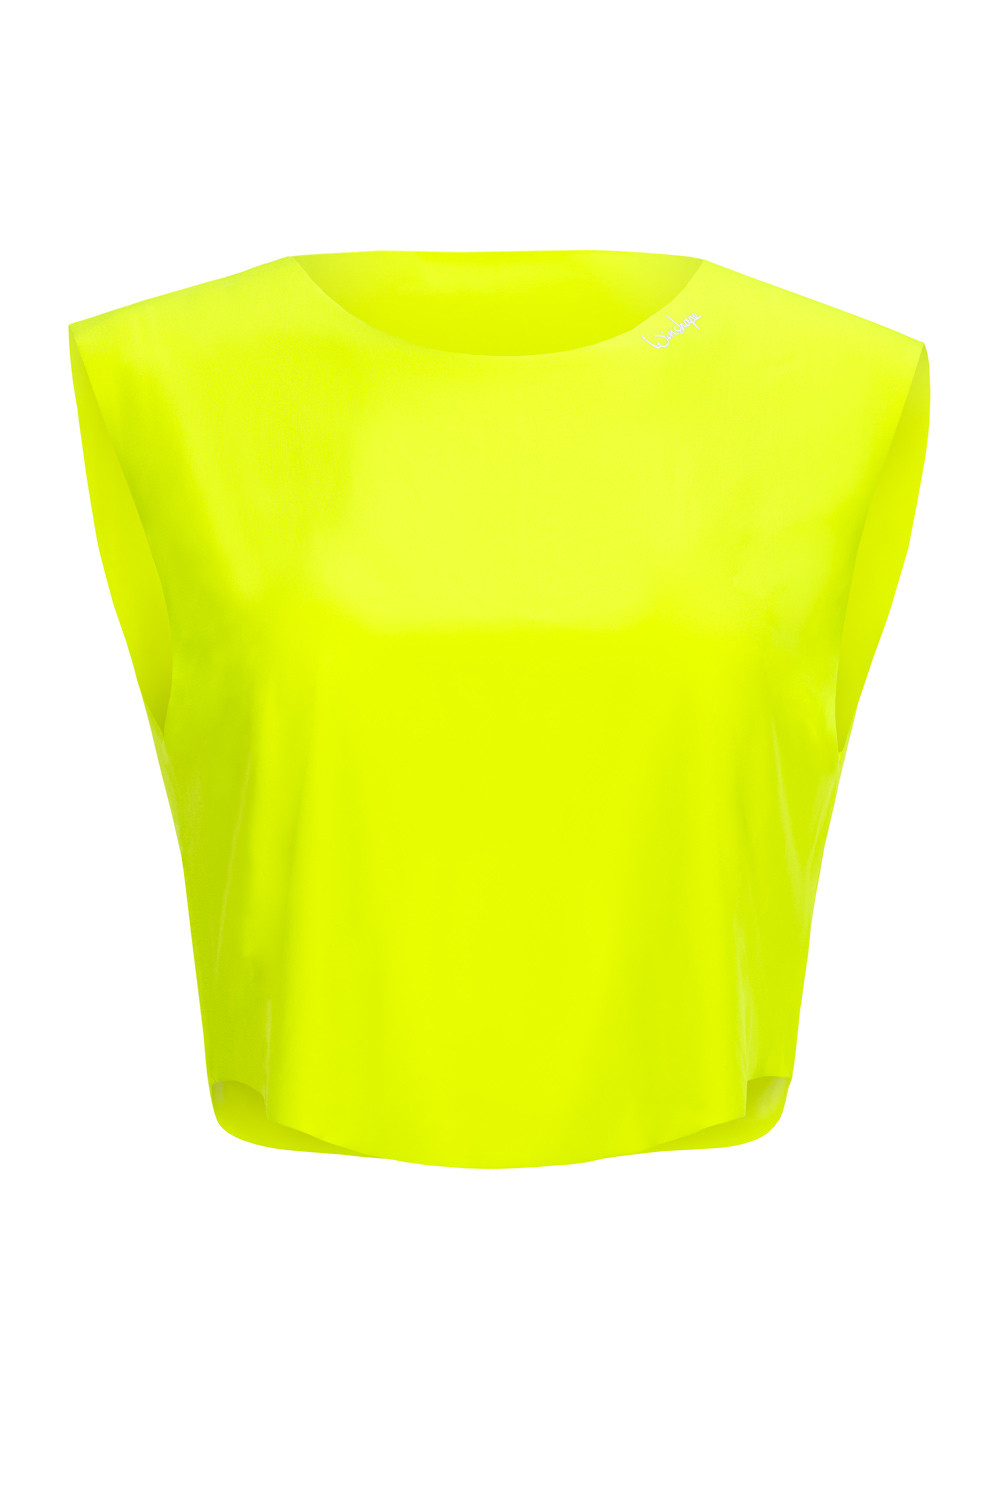 Functional Light Cropped Top gelb, Style neon Winshape AET115, All-Fit